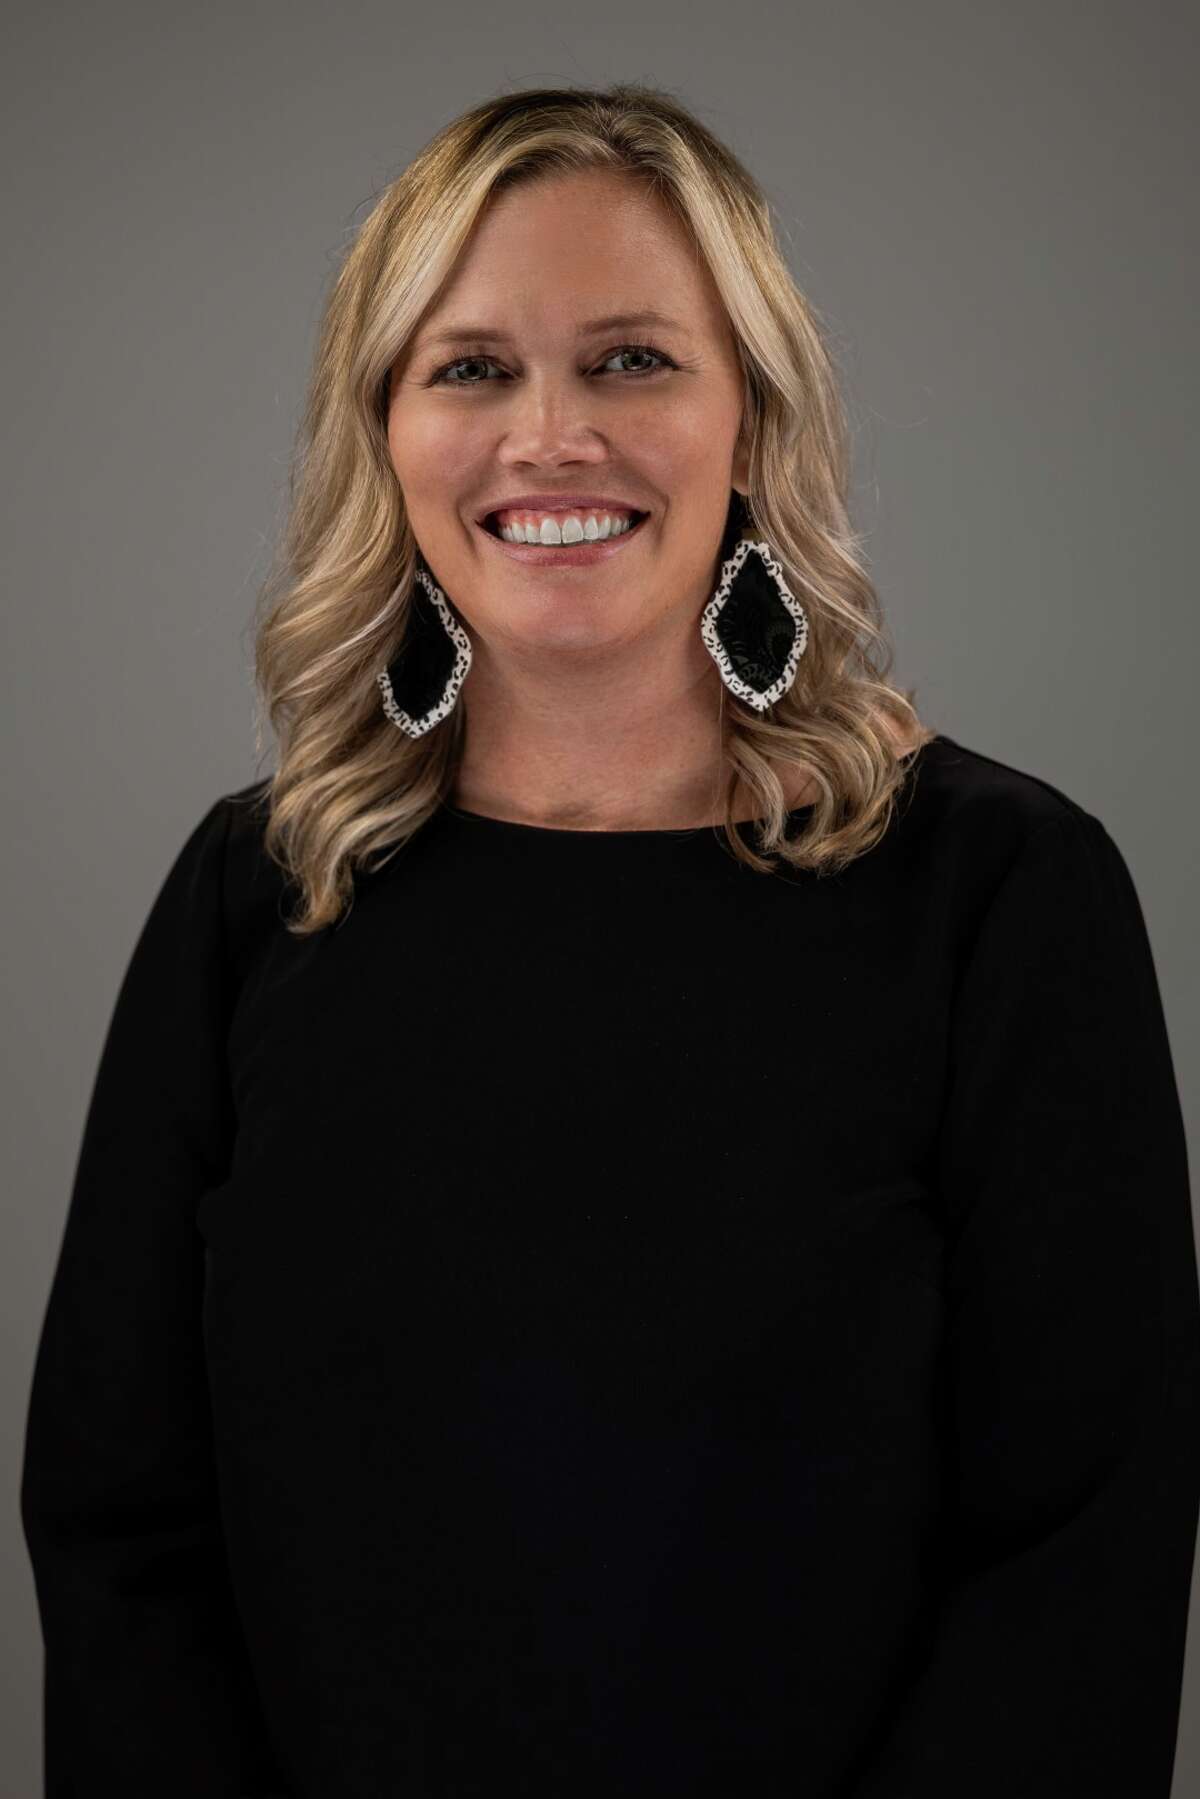 Bethany Medford, current assistant superintendent of middle schools for Conroe ISD, will be succeeding longtime Deputy Superintendent Chris Hines Hines when he steps down in June. 